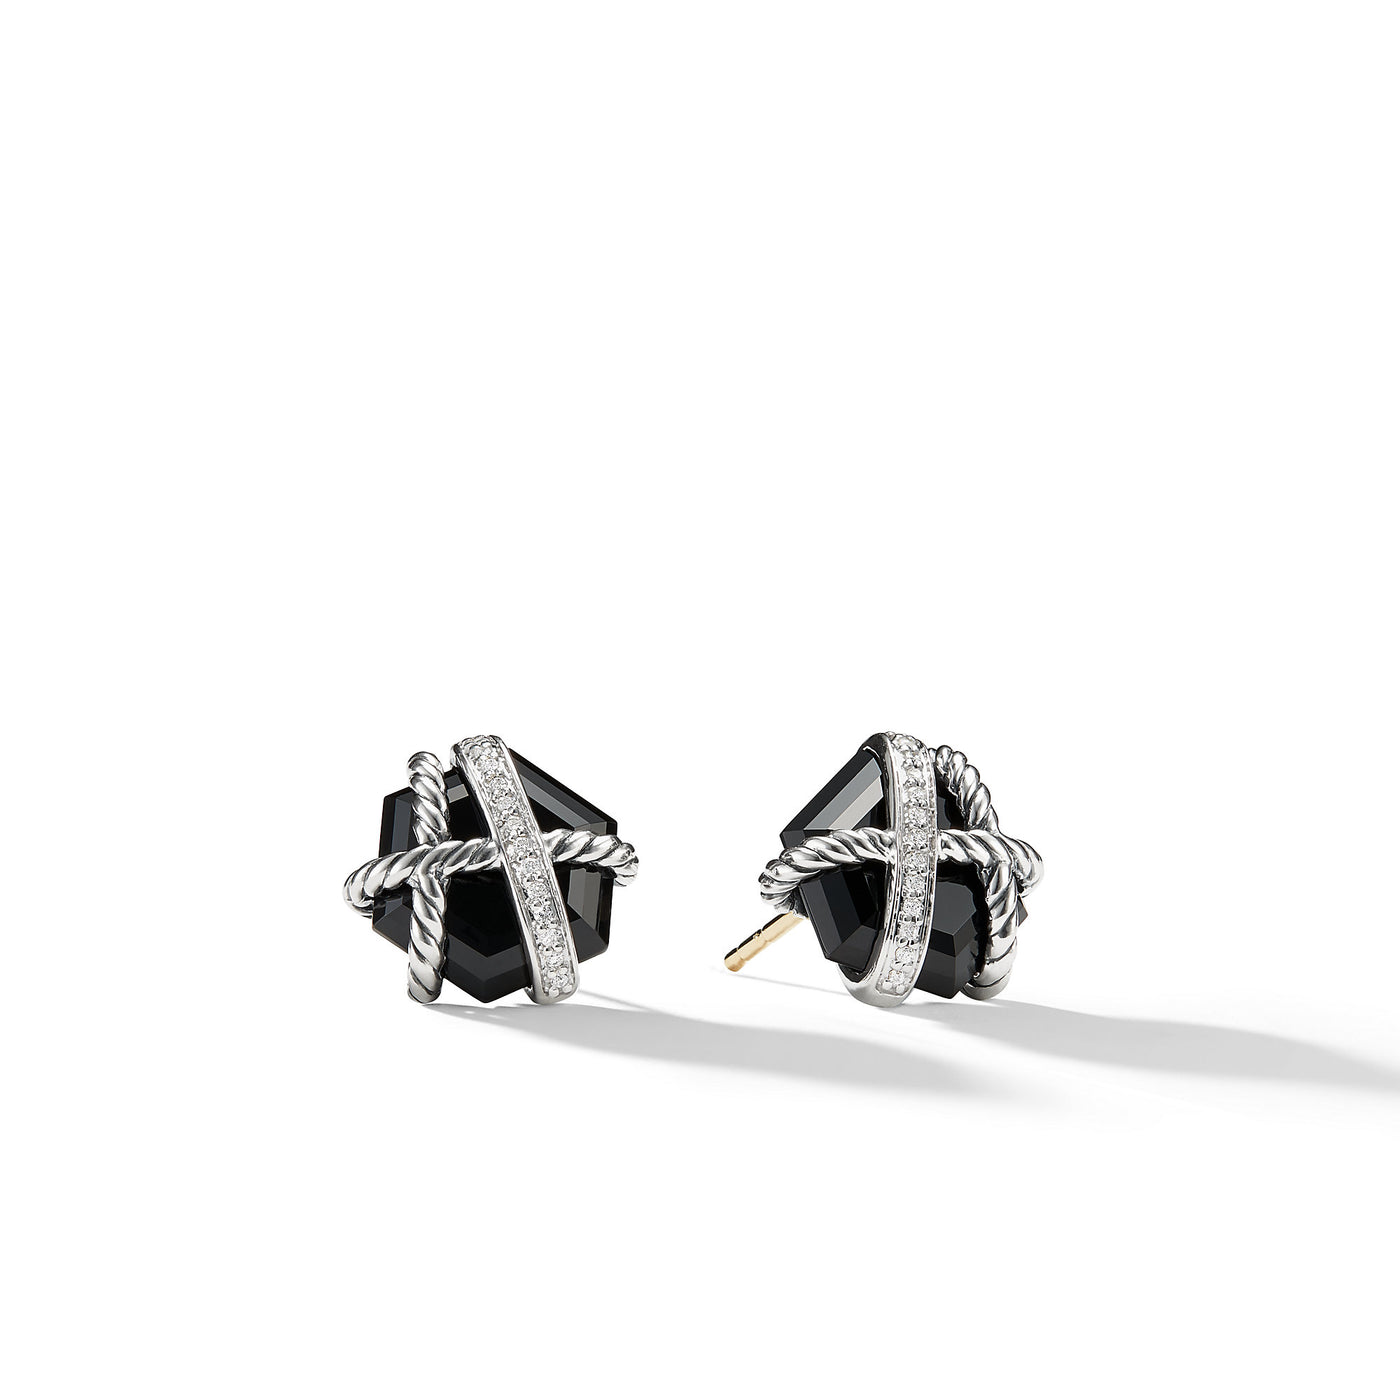 Cable Wrap Stud Earrings in Sterling Silver with Black Onyx and Diamonds\, 11mm